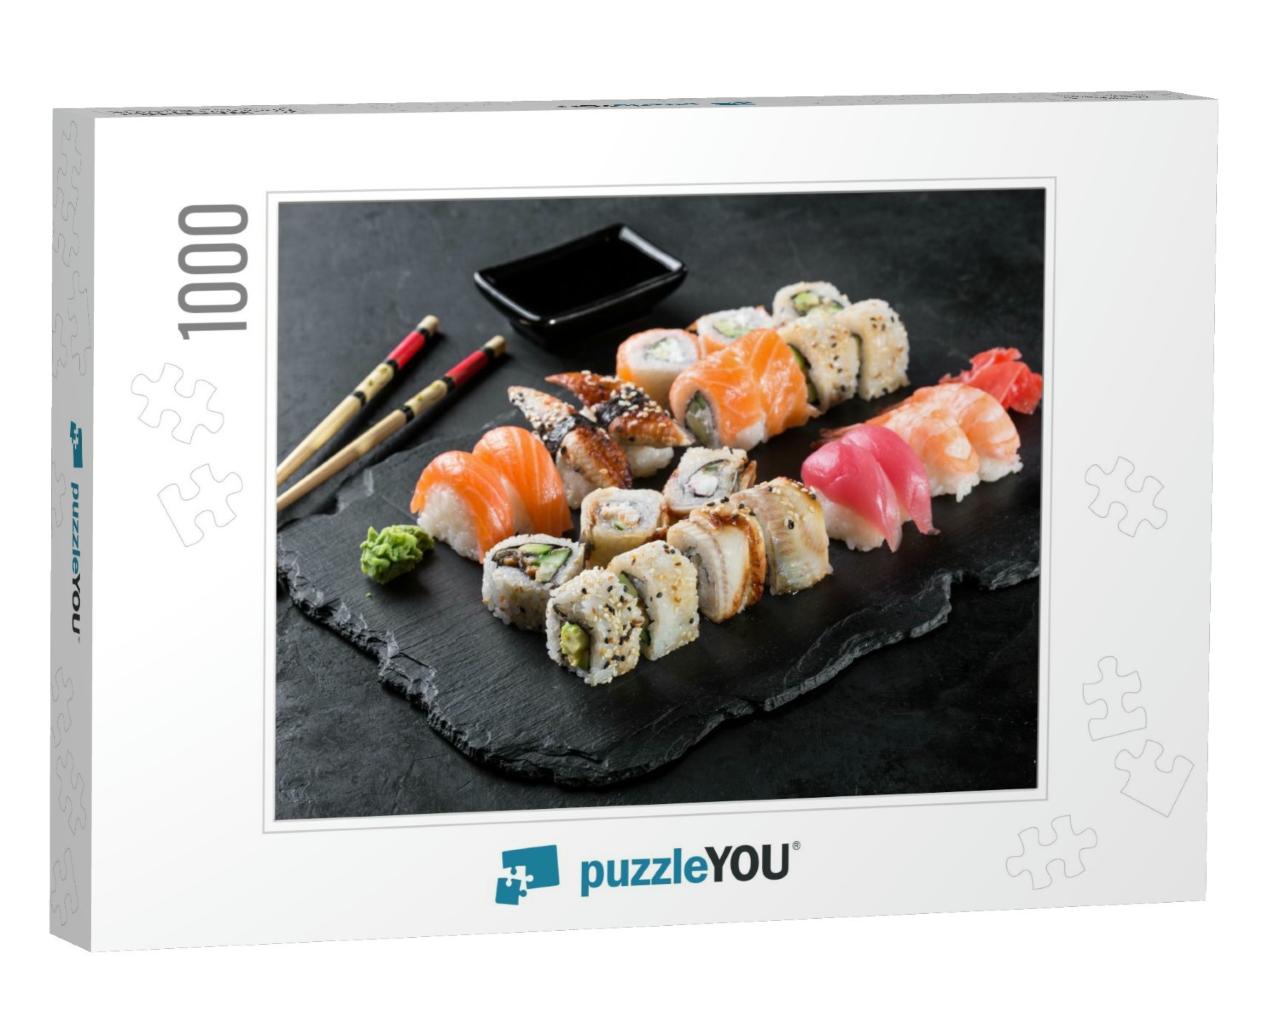 Sushi Rolls Set Served on Black Stone Slate on Dark Backg... Jigsaw Puzzle with 1000 pieces